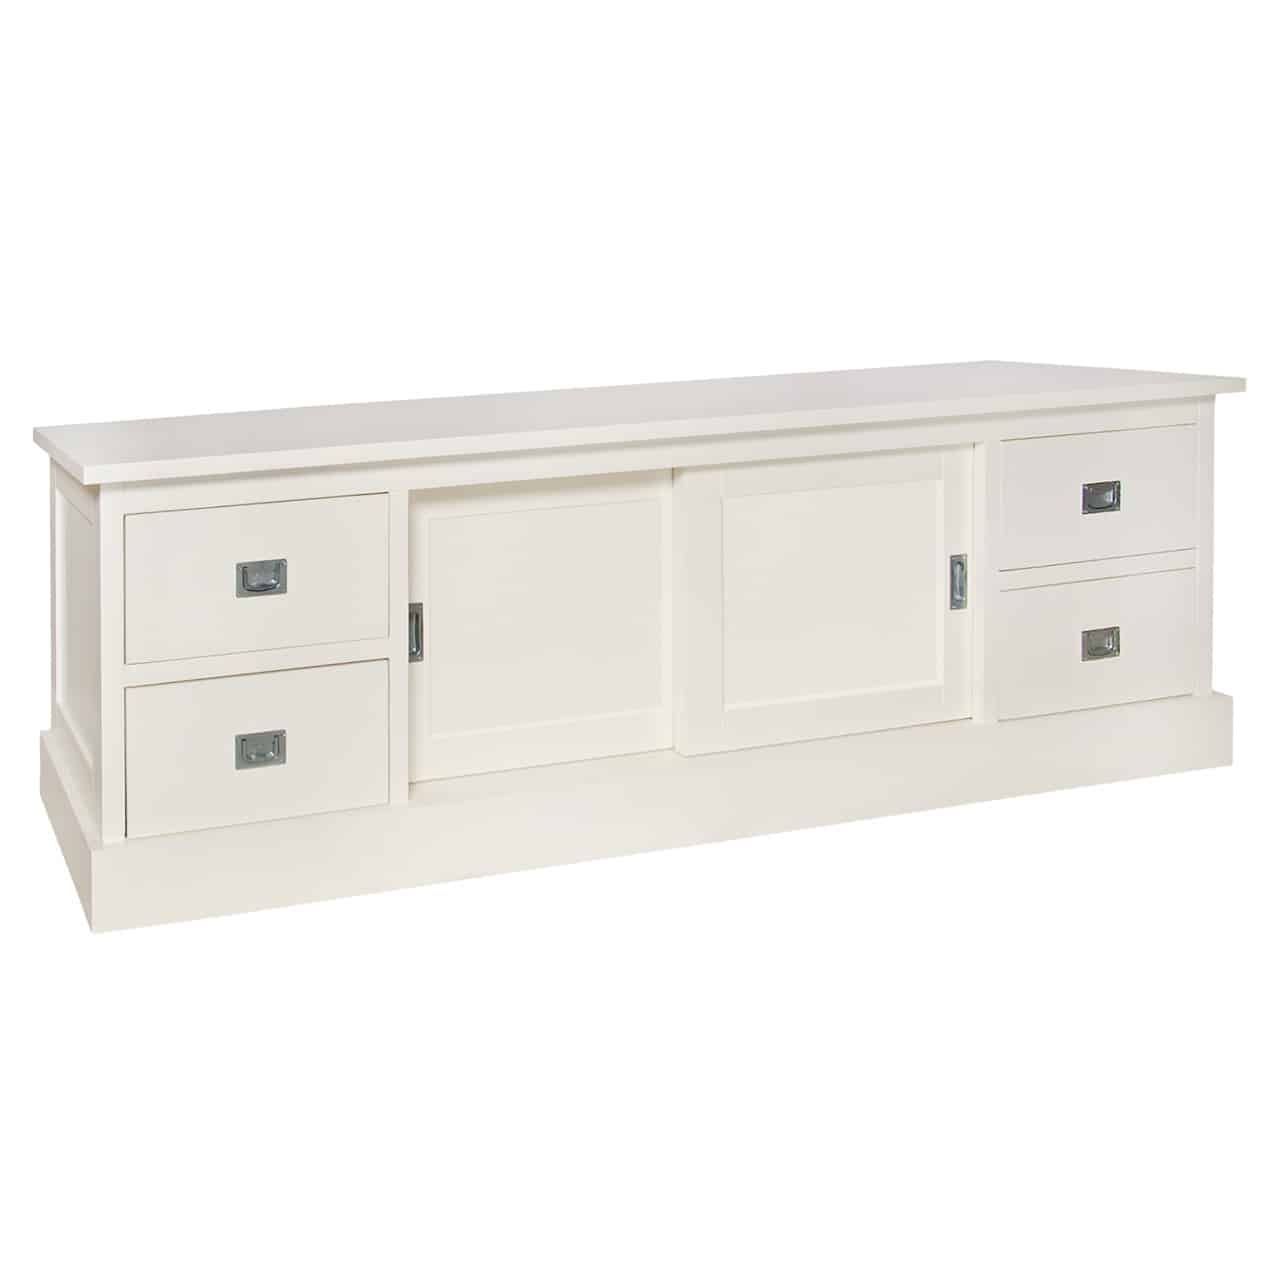 Tv Dresser Tobi 2 Sliding 4 Load – Richmond Interiors Official Home Page Intended For Most Current Tobias 4 Door Sideboards (View 3 of 20)